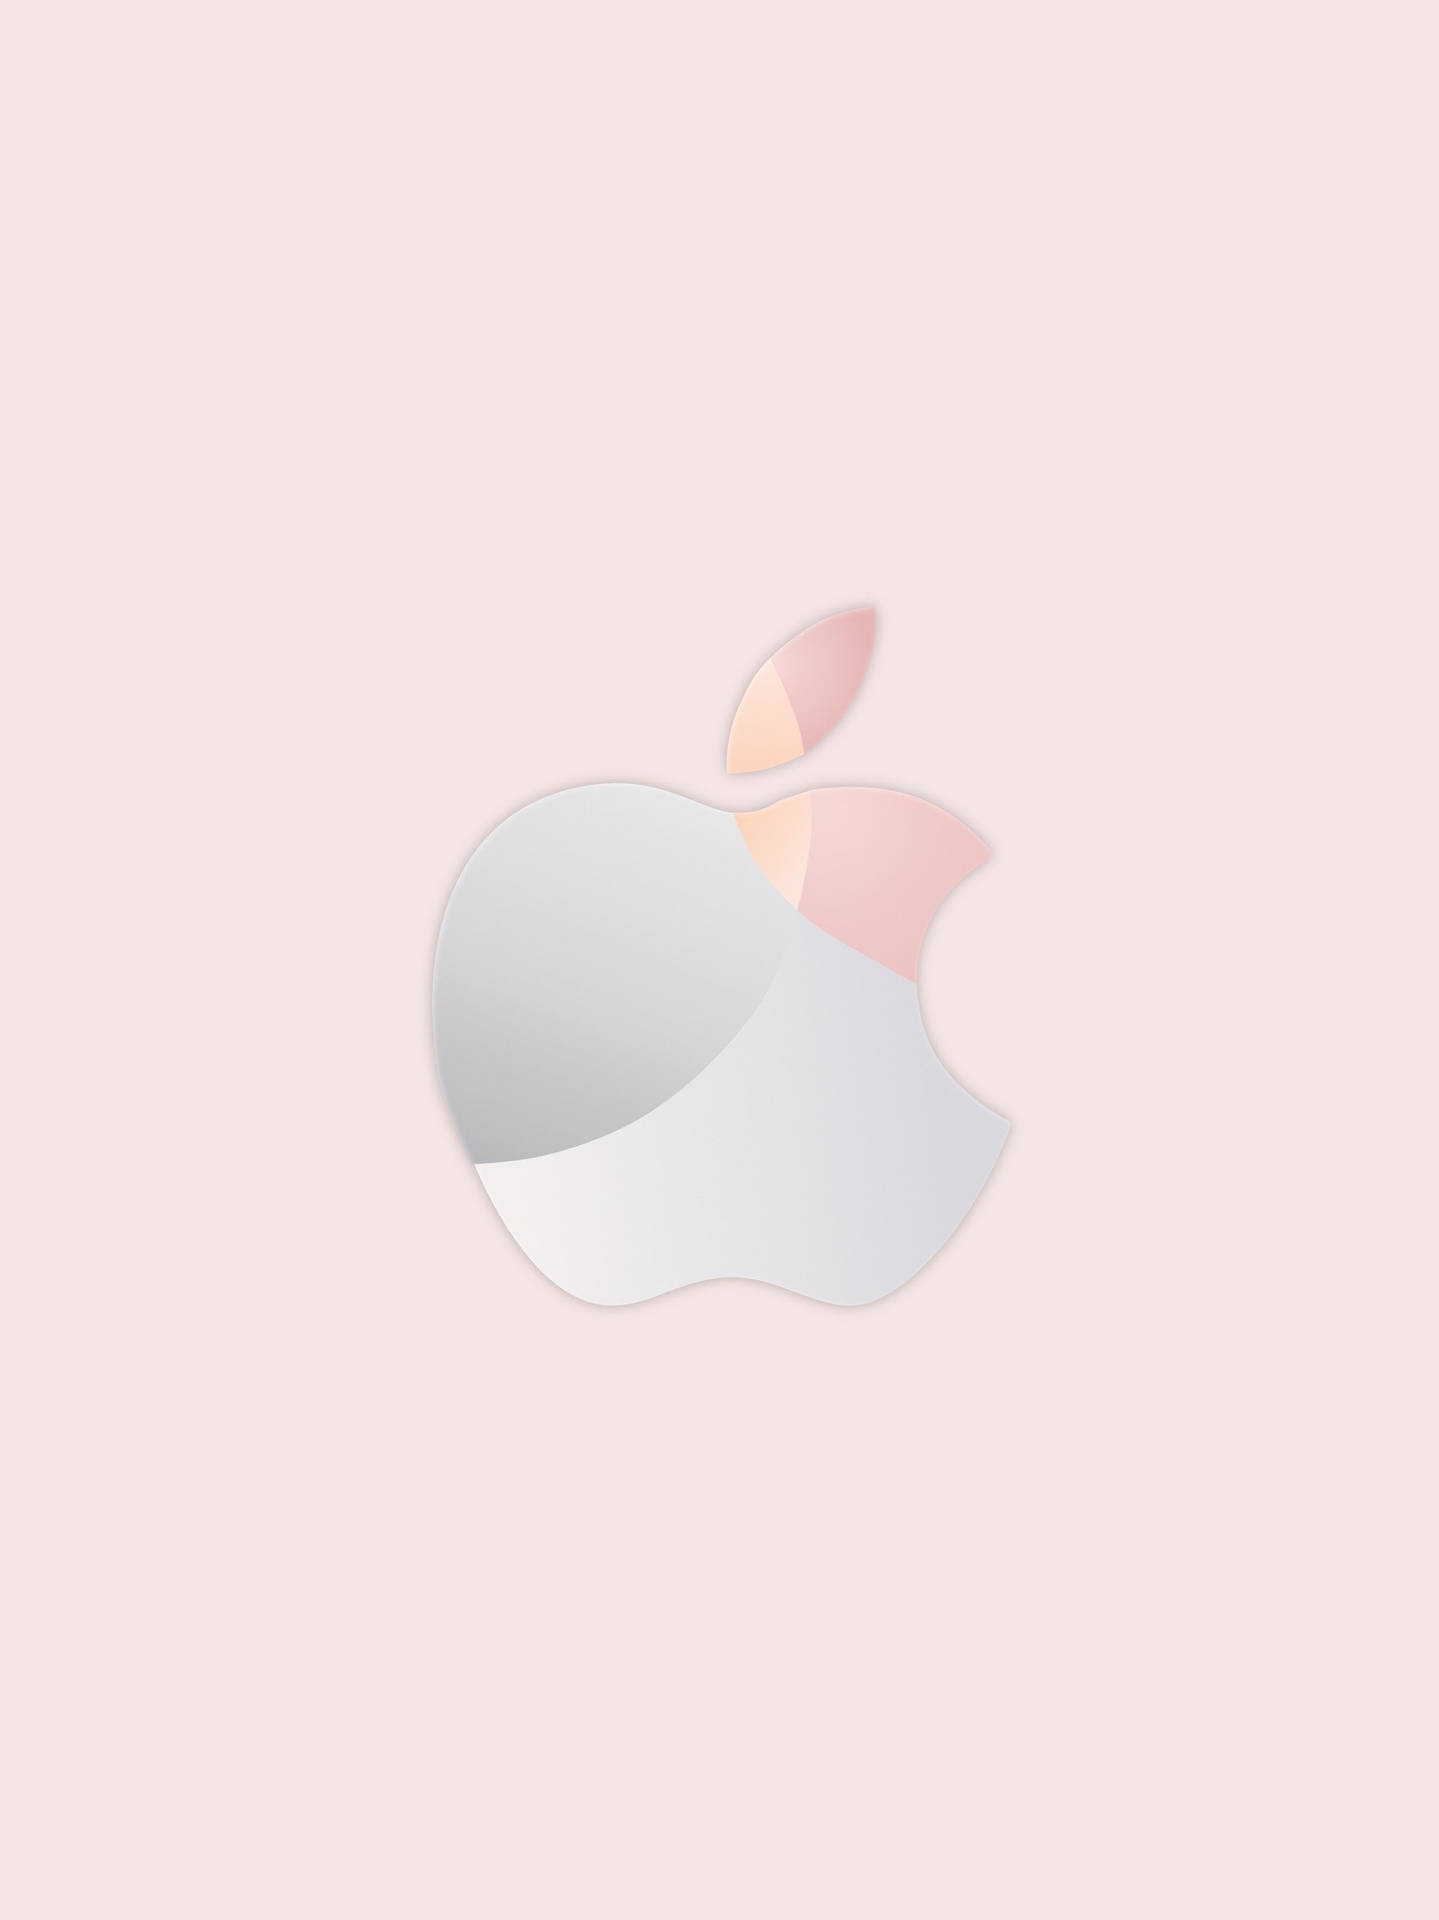 Rose Gold Ipad Simple Apple Logo Picture